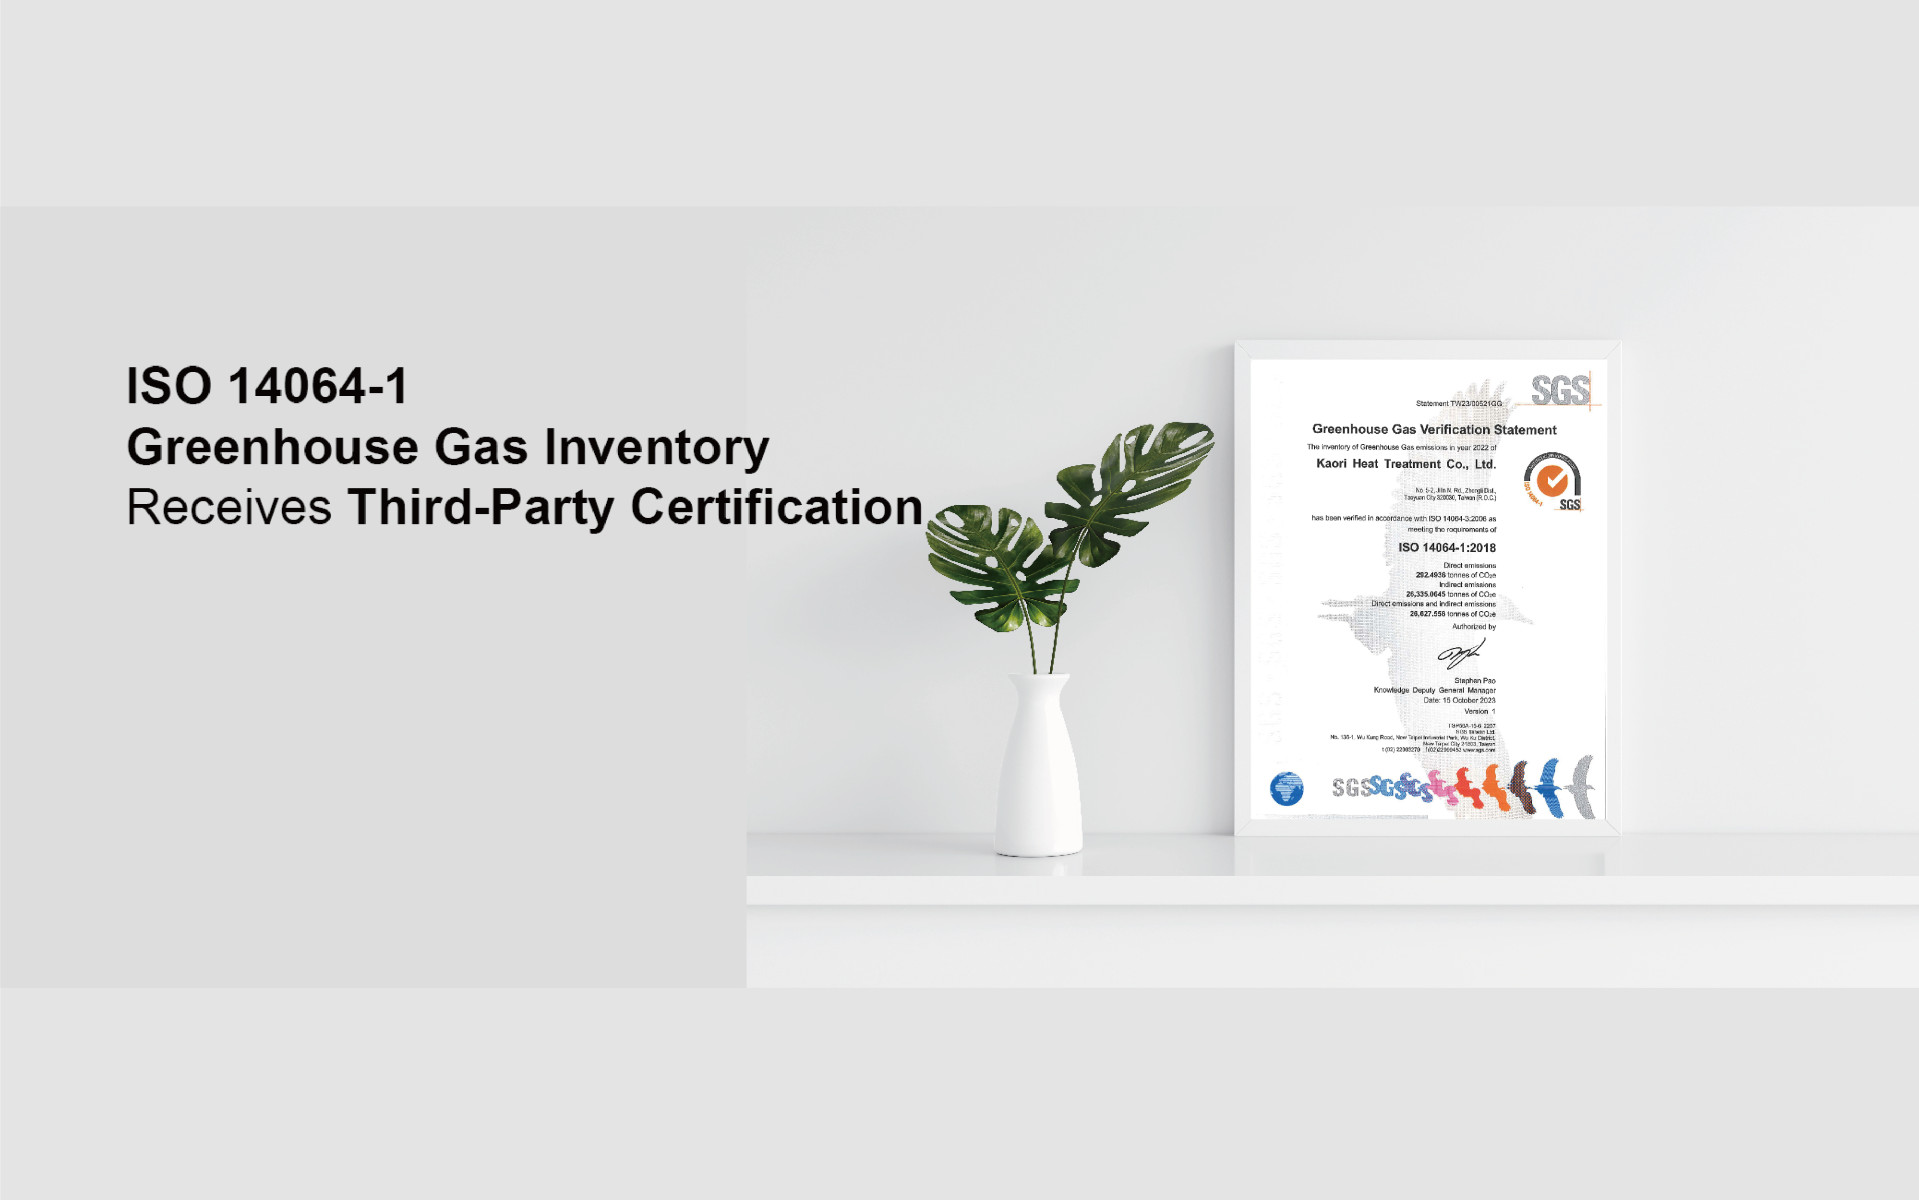  ISO 14064-1 Greenhouse Gas Inventory Receives Third-Party Certification 